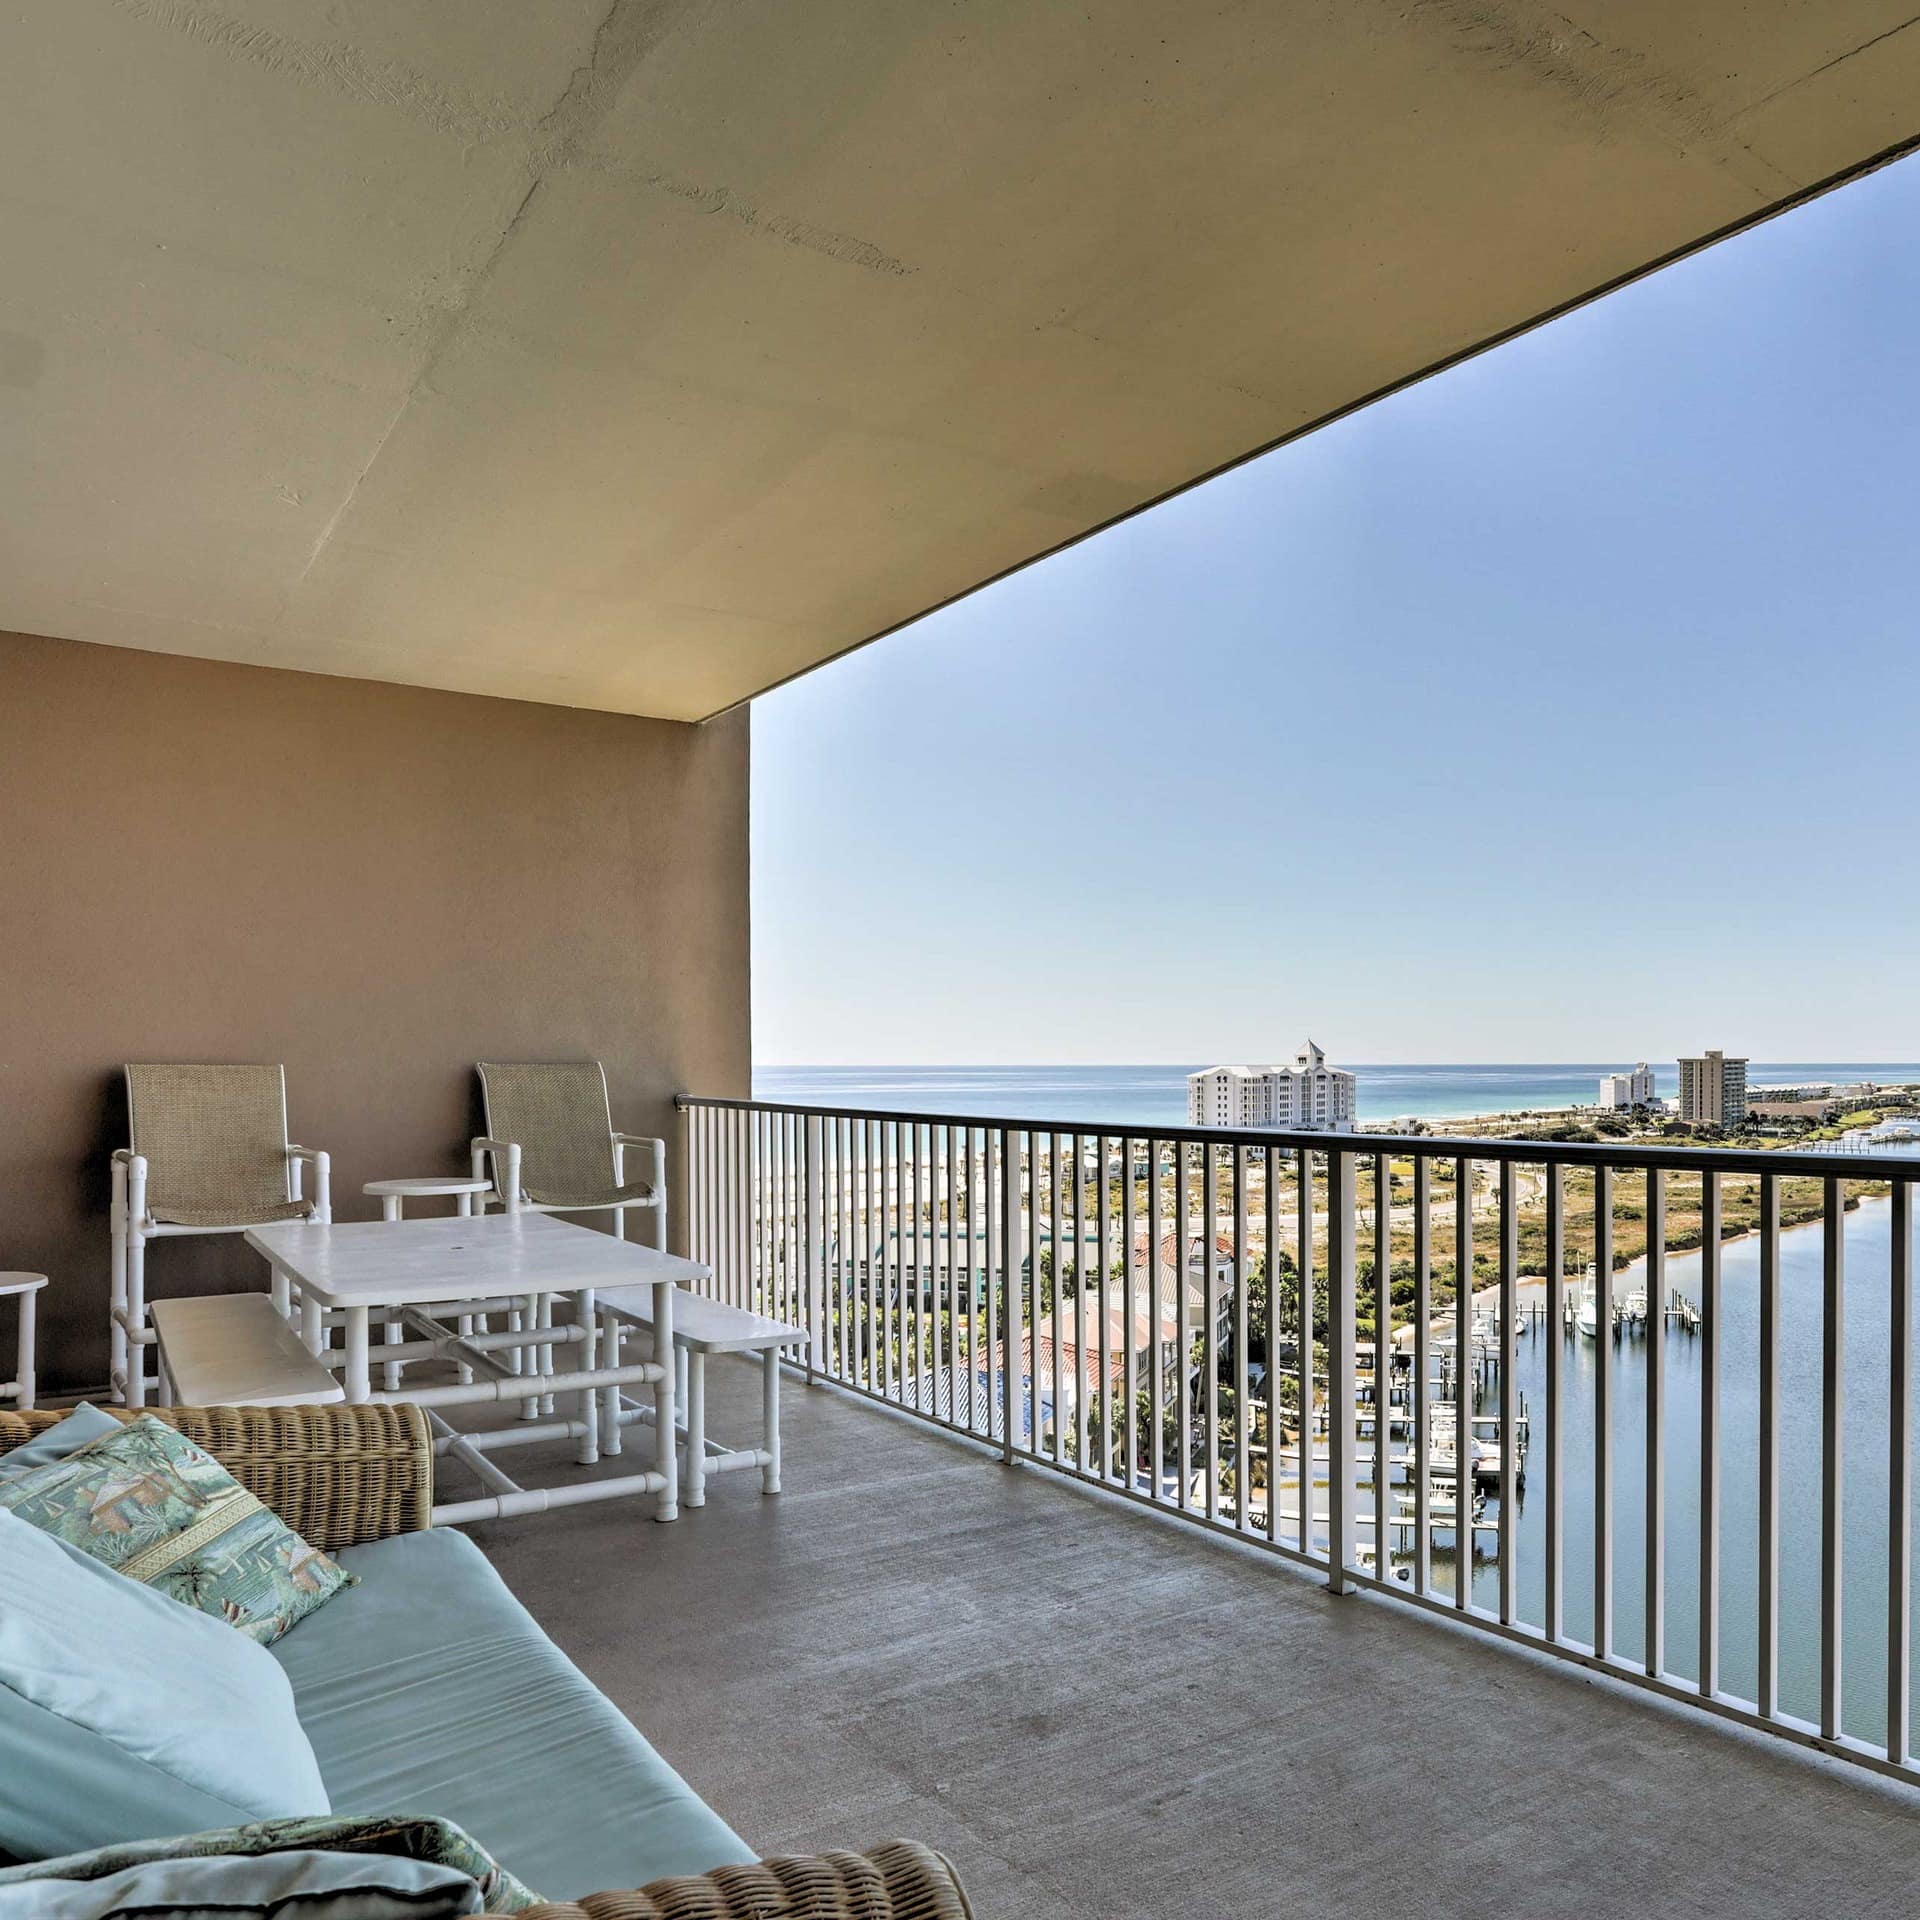 A balcony with a view of the lagoon and Pensacola Beach, filled with outdoor furniture